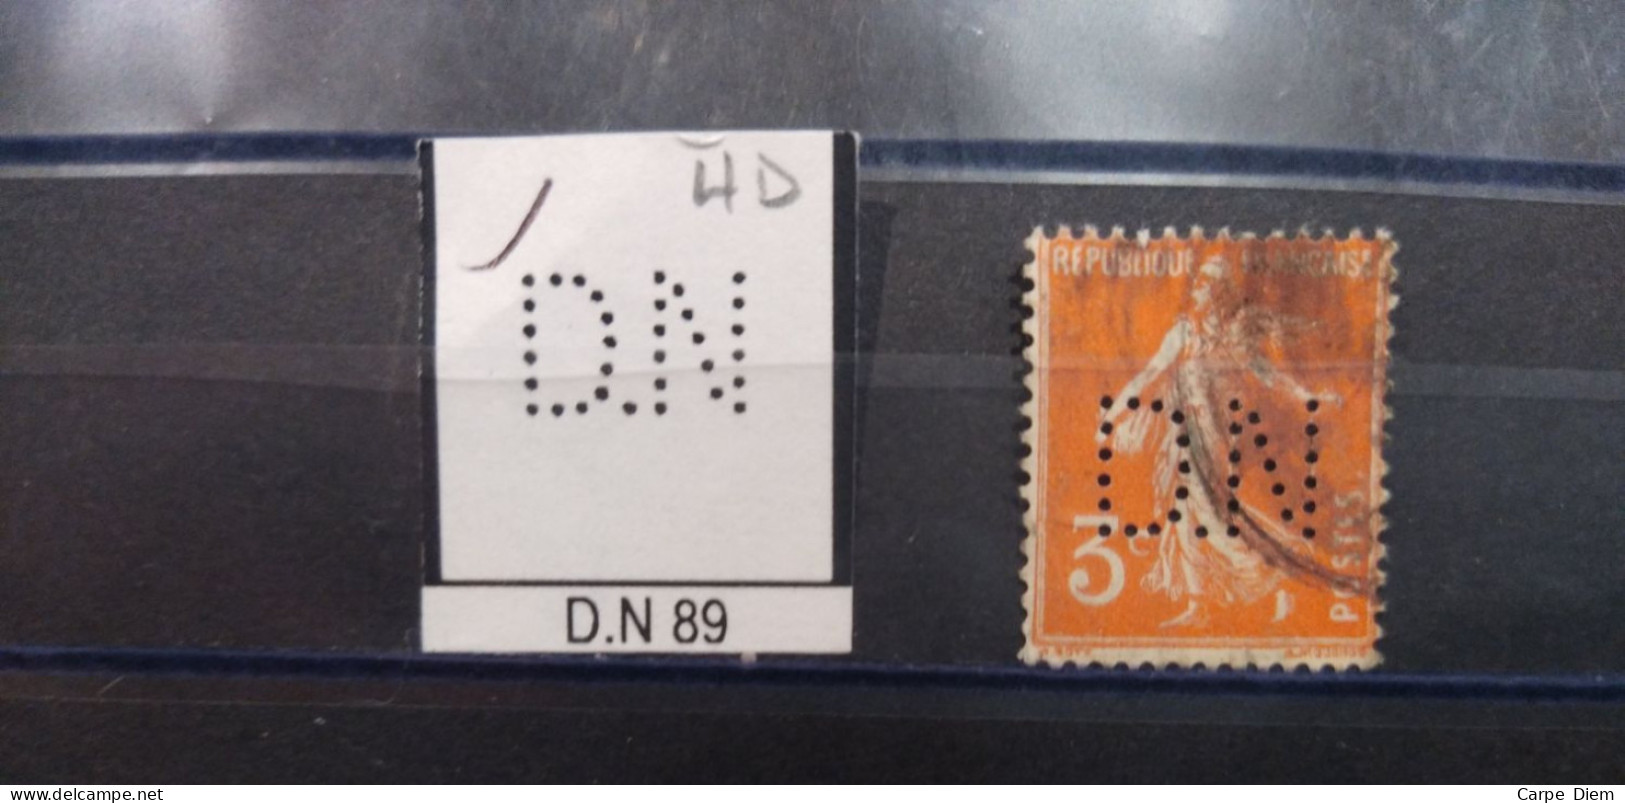 FRANCE D.N 89 TIMBRE DN 89 INDICE 4 SUR 278A PERFORE PERFORES PERFIN PERFINS PERFO PERFORATION PERFORIERT - Gebraucht